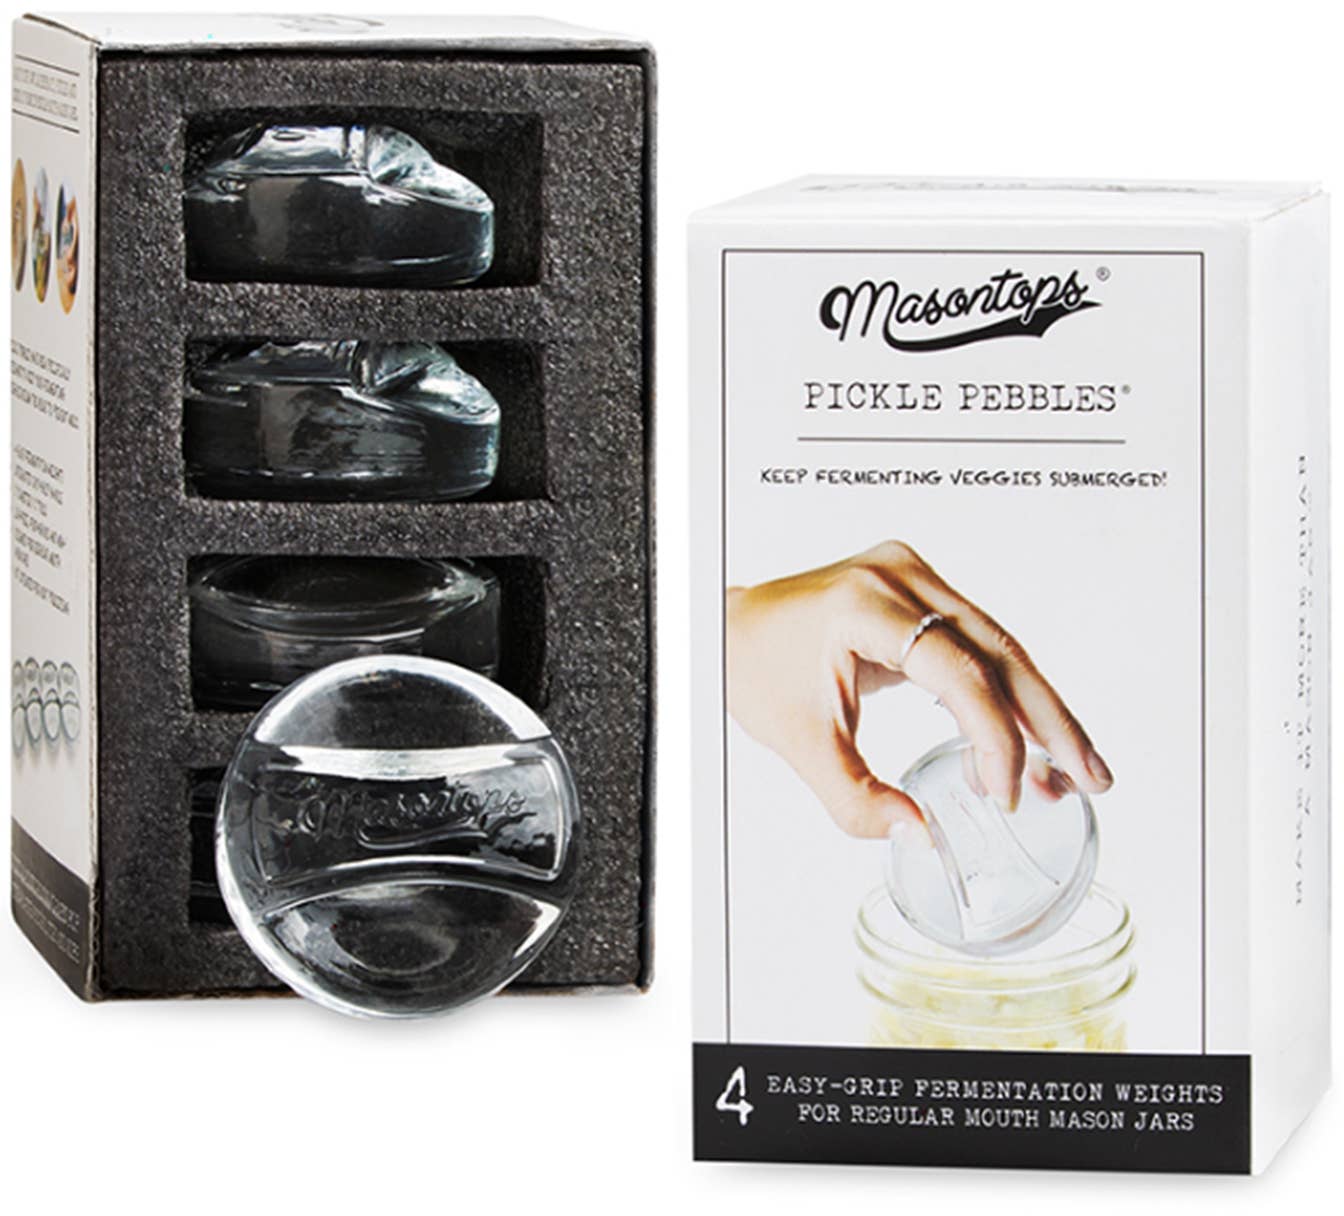 Masontops - Wide Mouth Pickle Pebble Glass Fermentation Weights